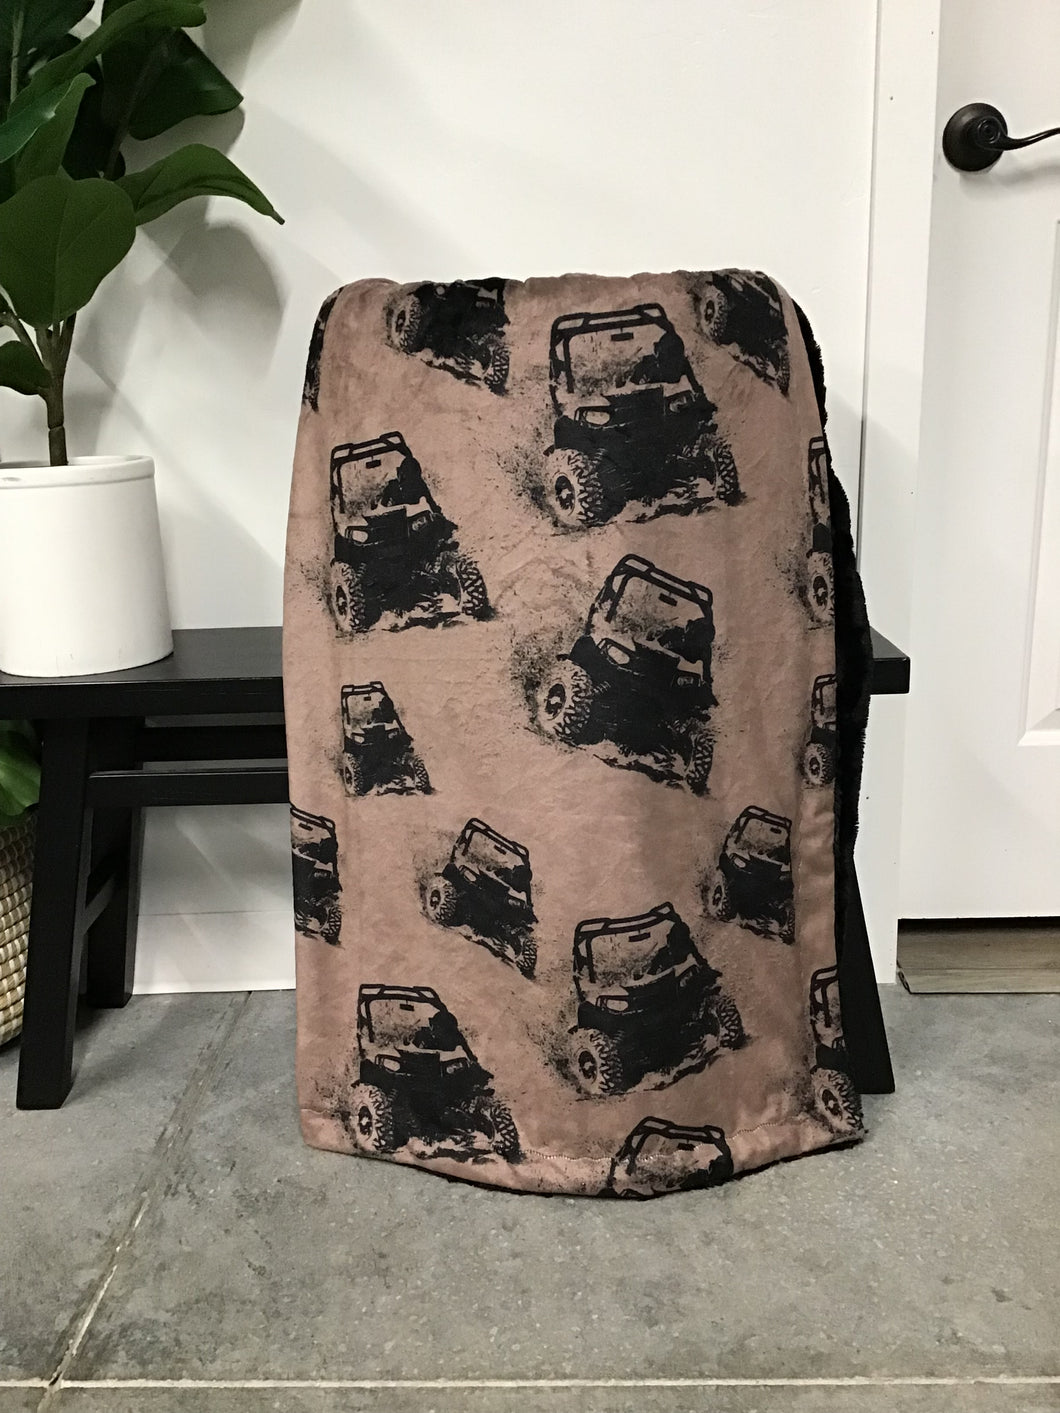 Side by side ride Throw Blanket *READY TO SHIP*